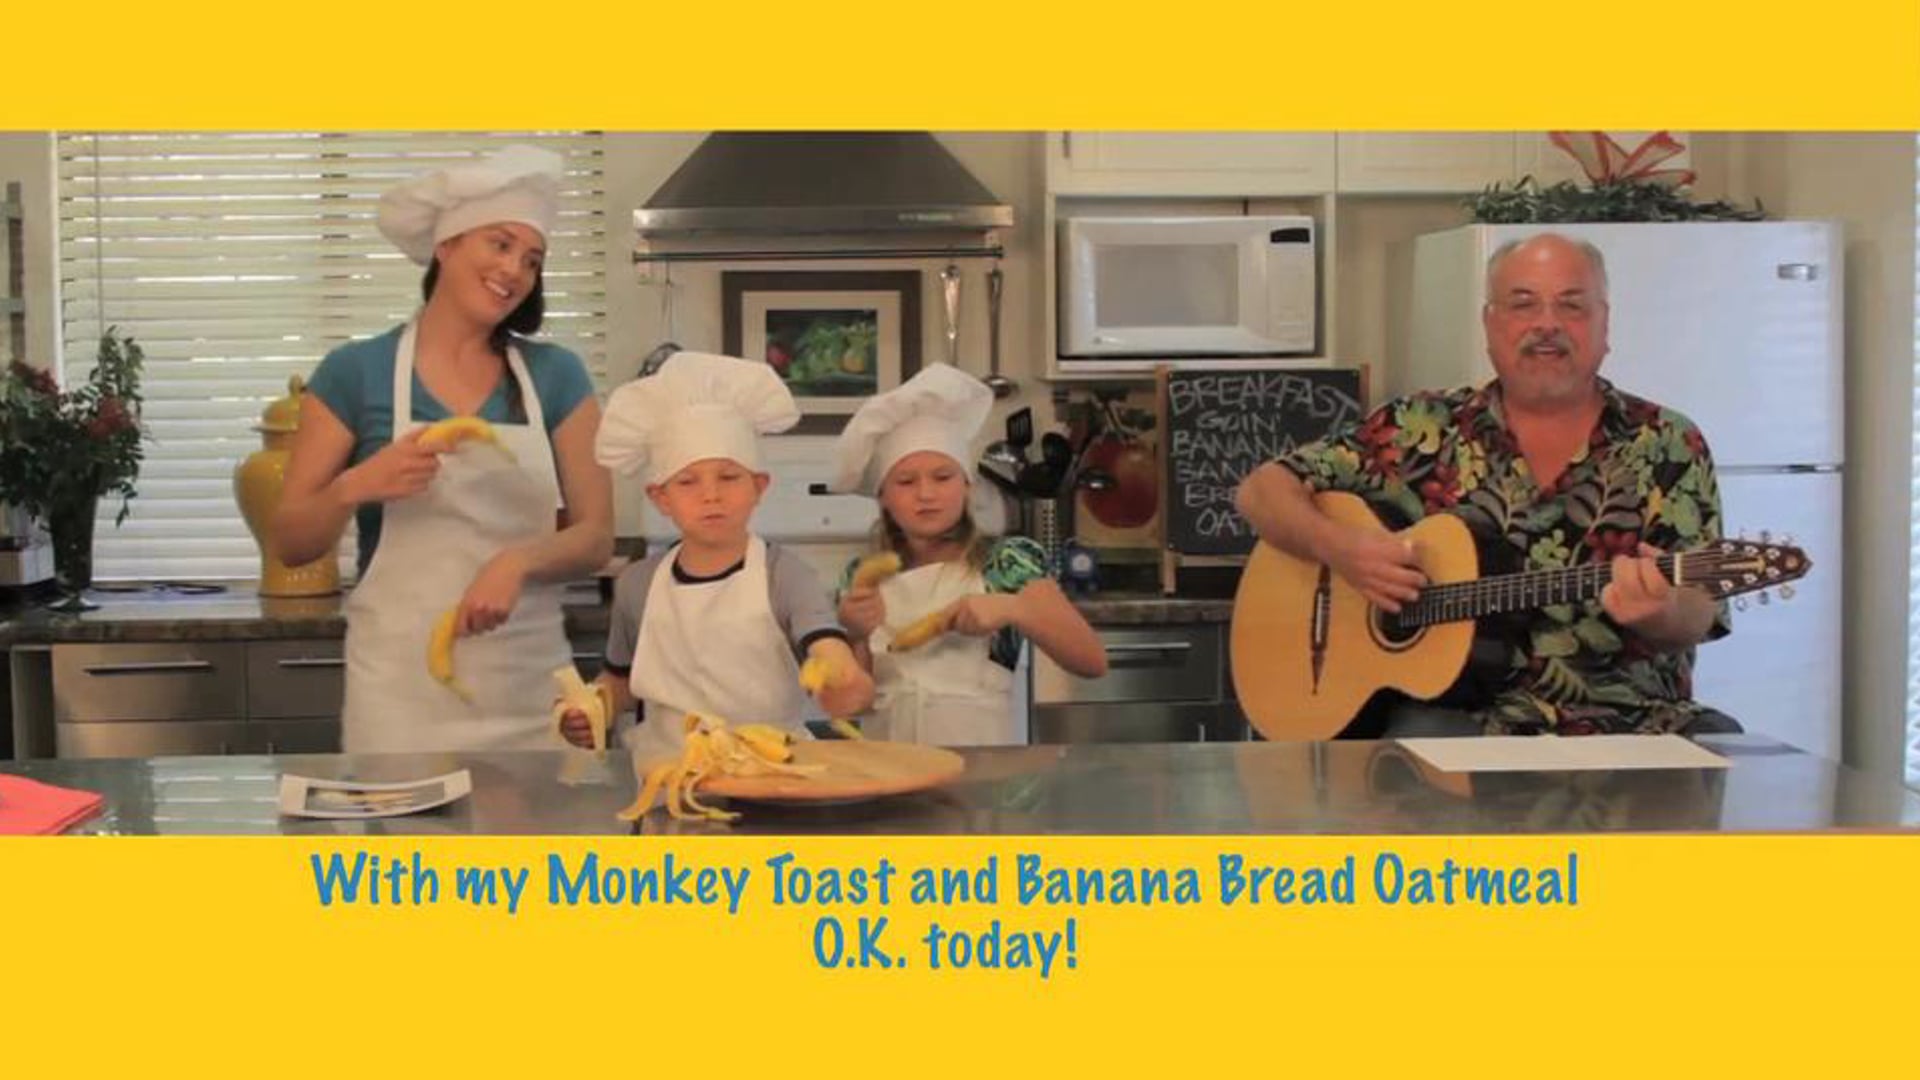 "Banana Breakfast" song by Ron Franklin!